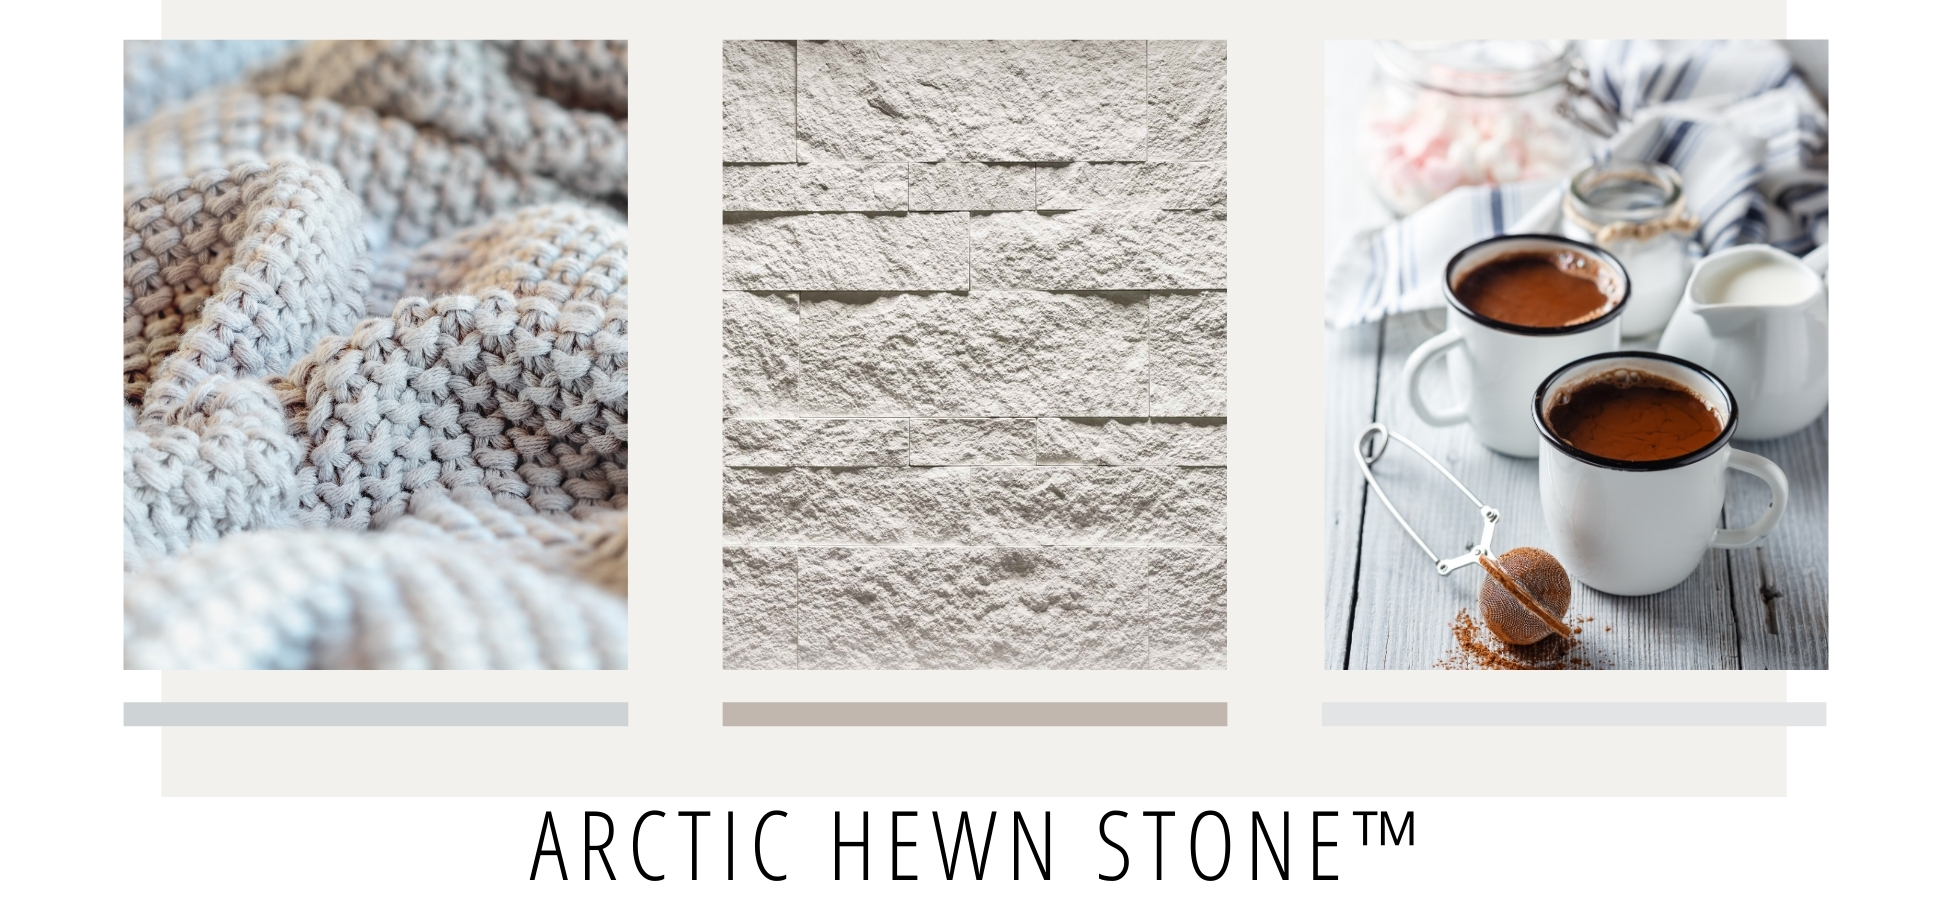 Arctic Hewn Stone™ by Cultured Stone®